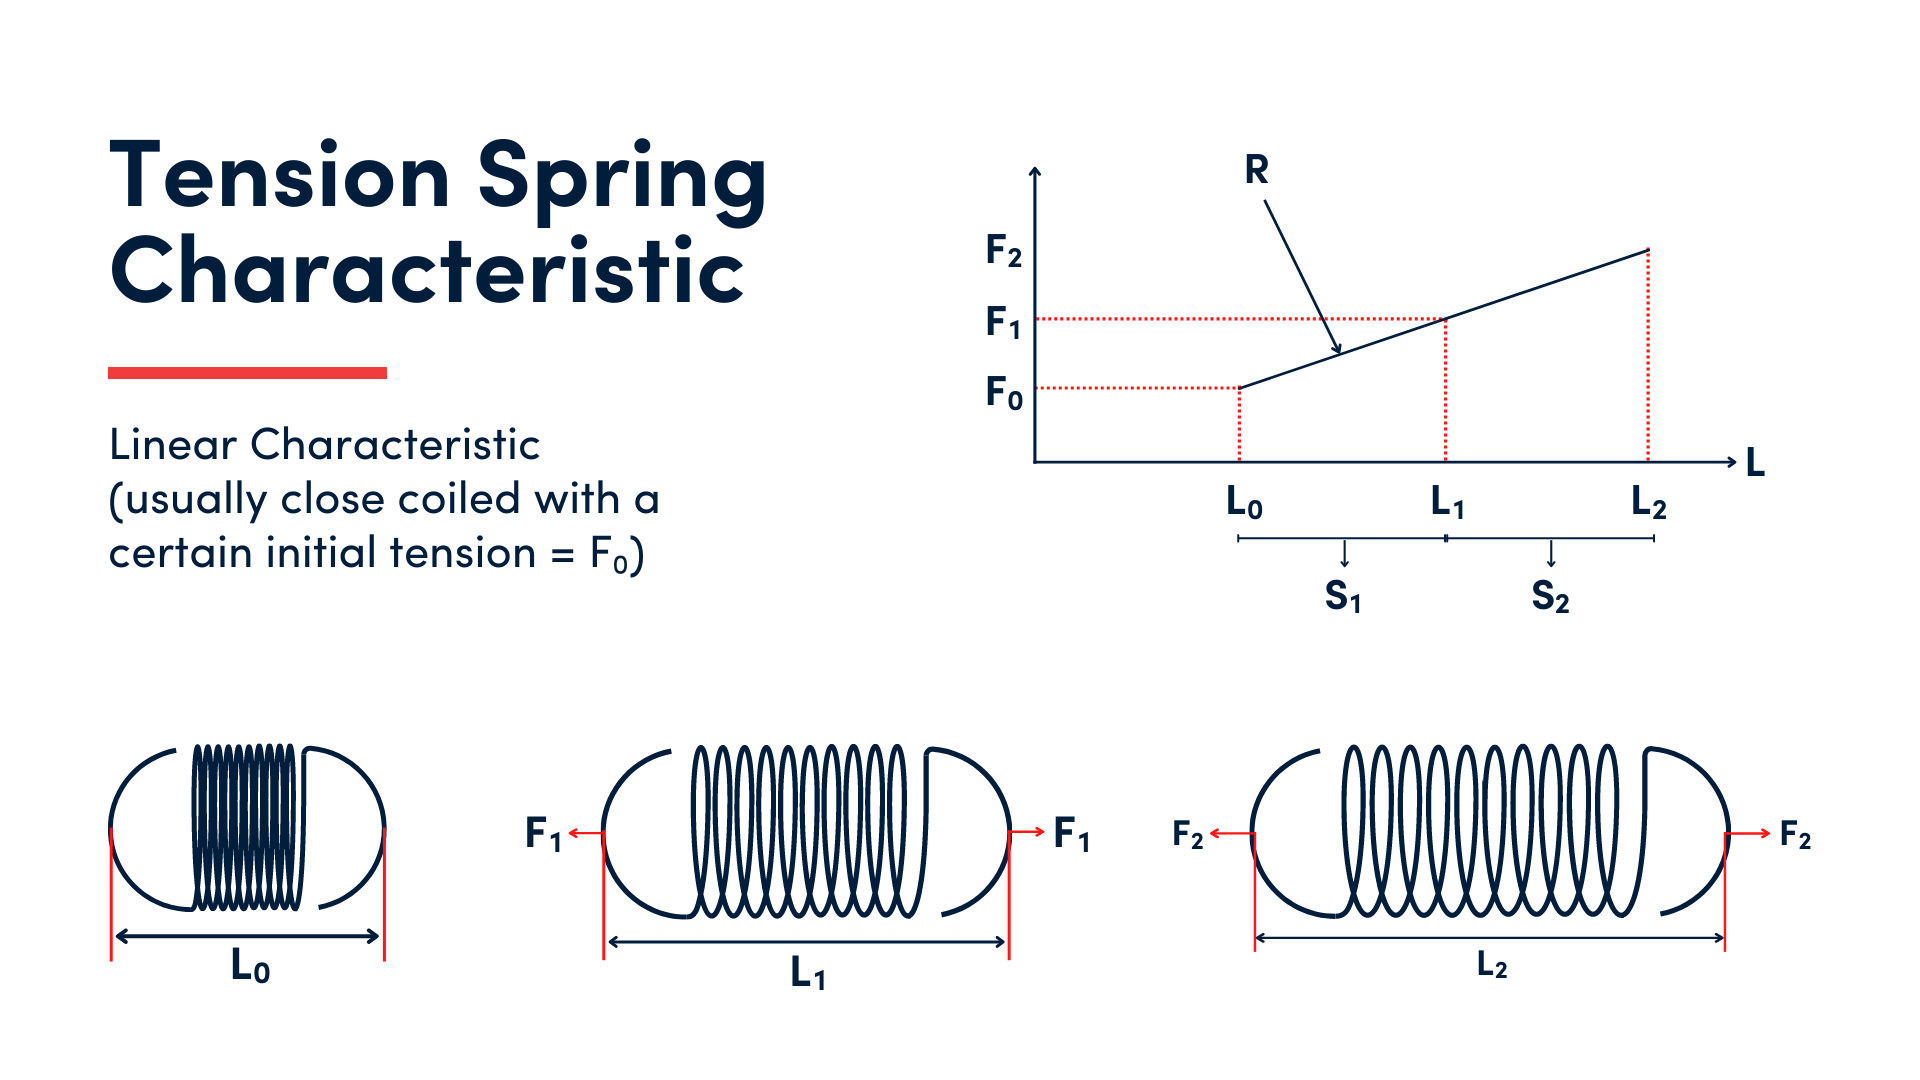 Tension Spring characteristic infographic showing spring stretching